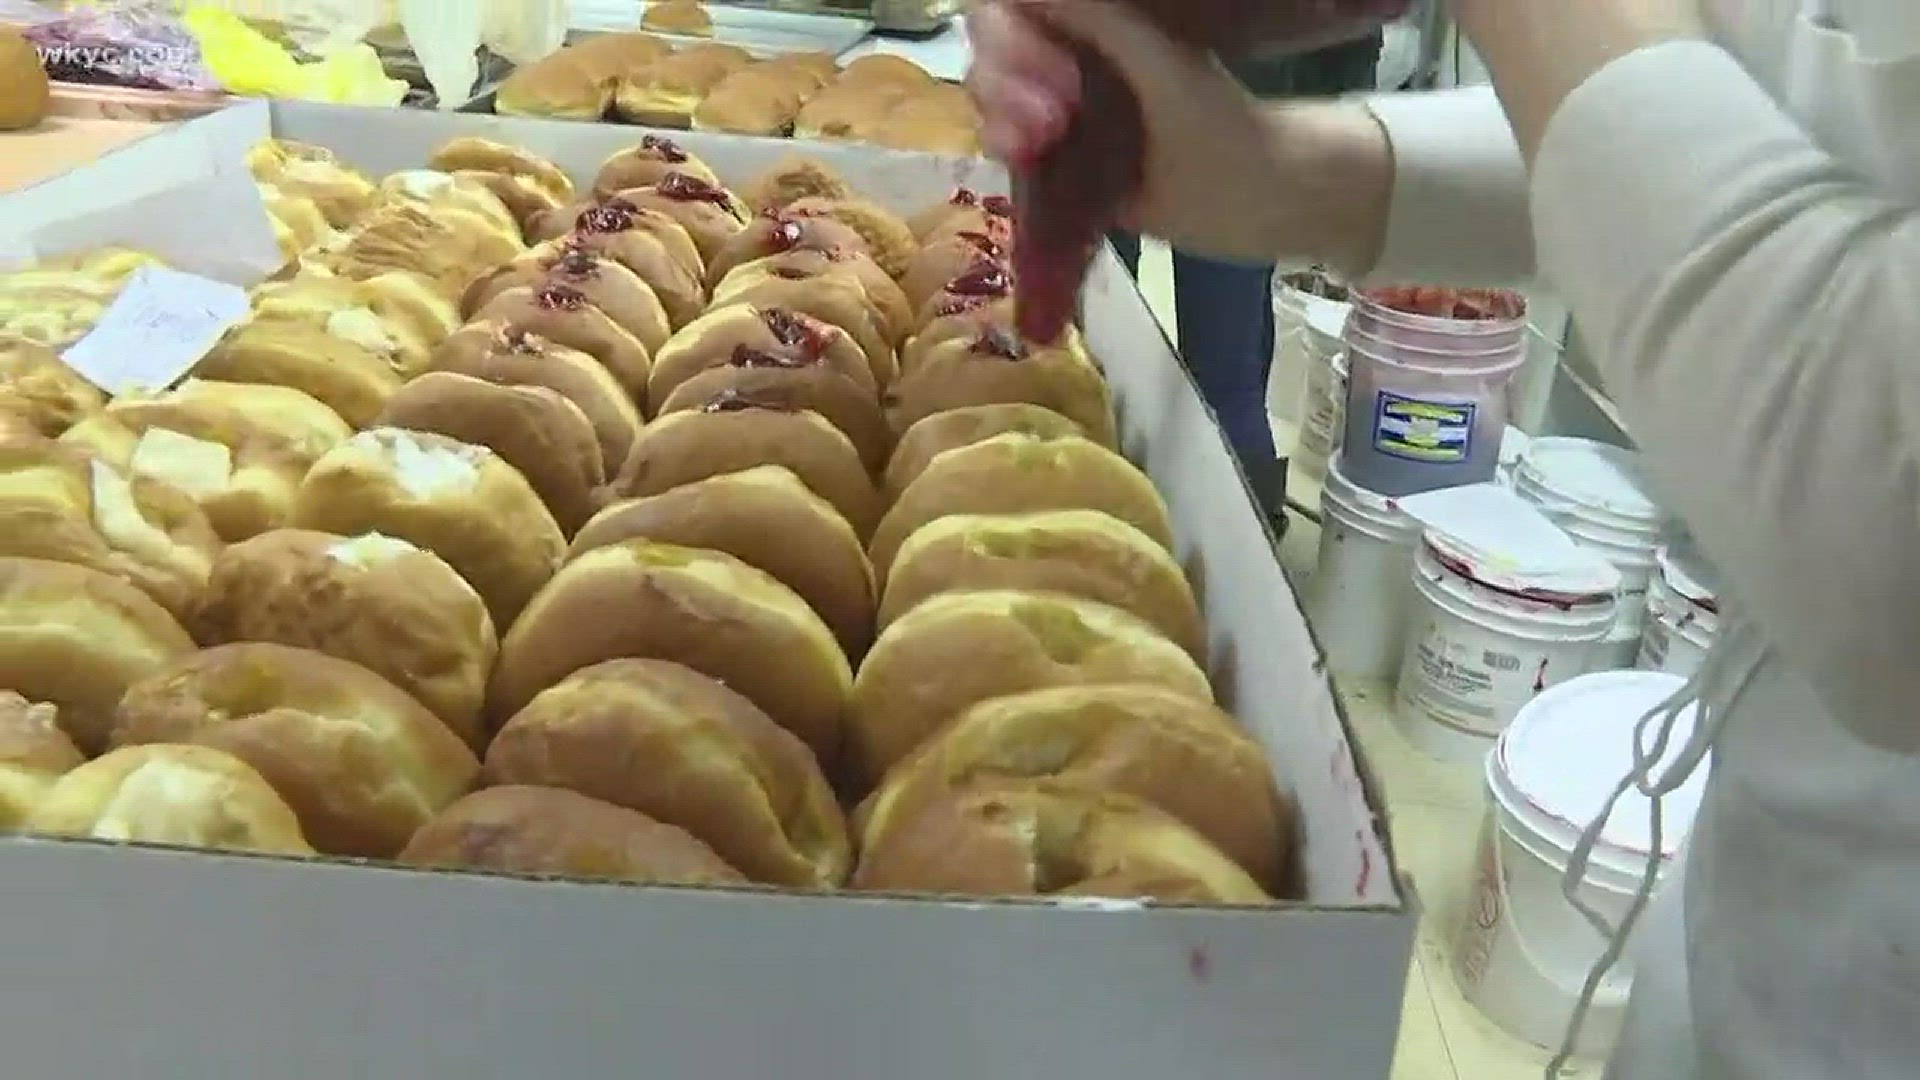 Feb. 13, 2018: It's Fat Tuesday, and that means paczki! WKYC's Tiffany Tarpley spent her morning at Rudy's in Parma watching as they make the sweet treats.